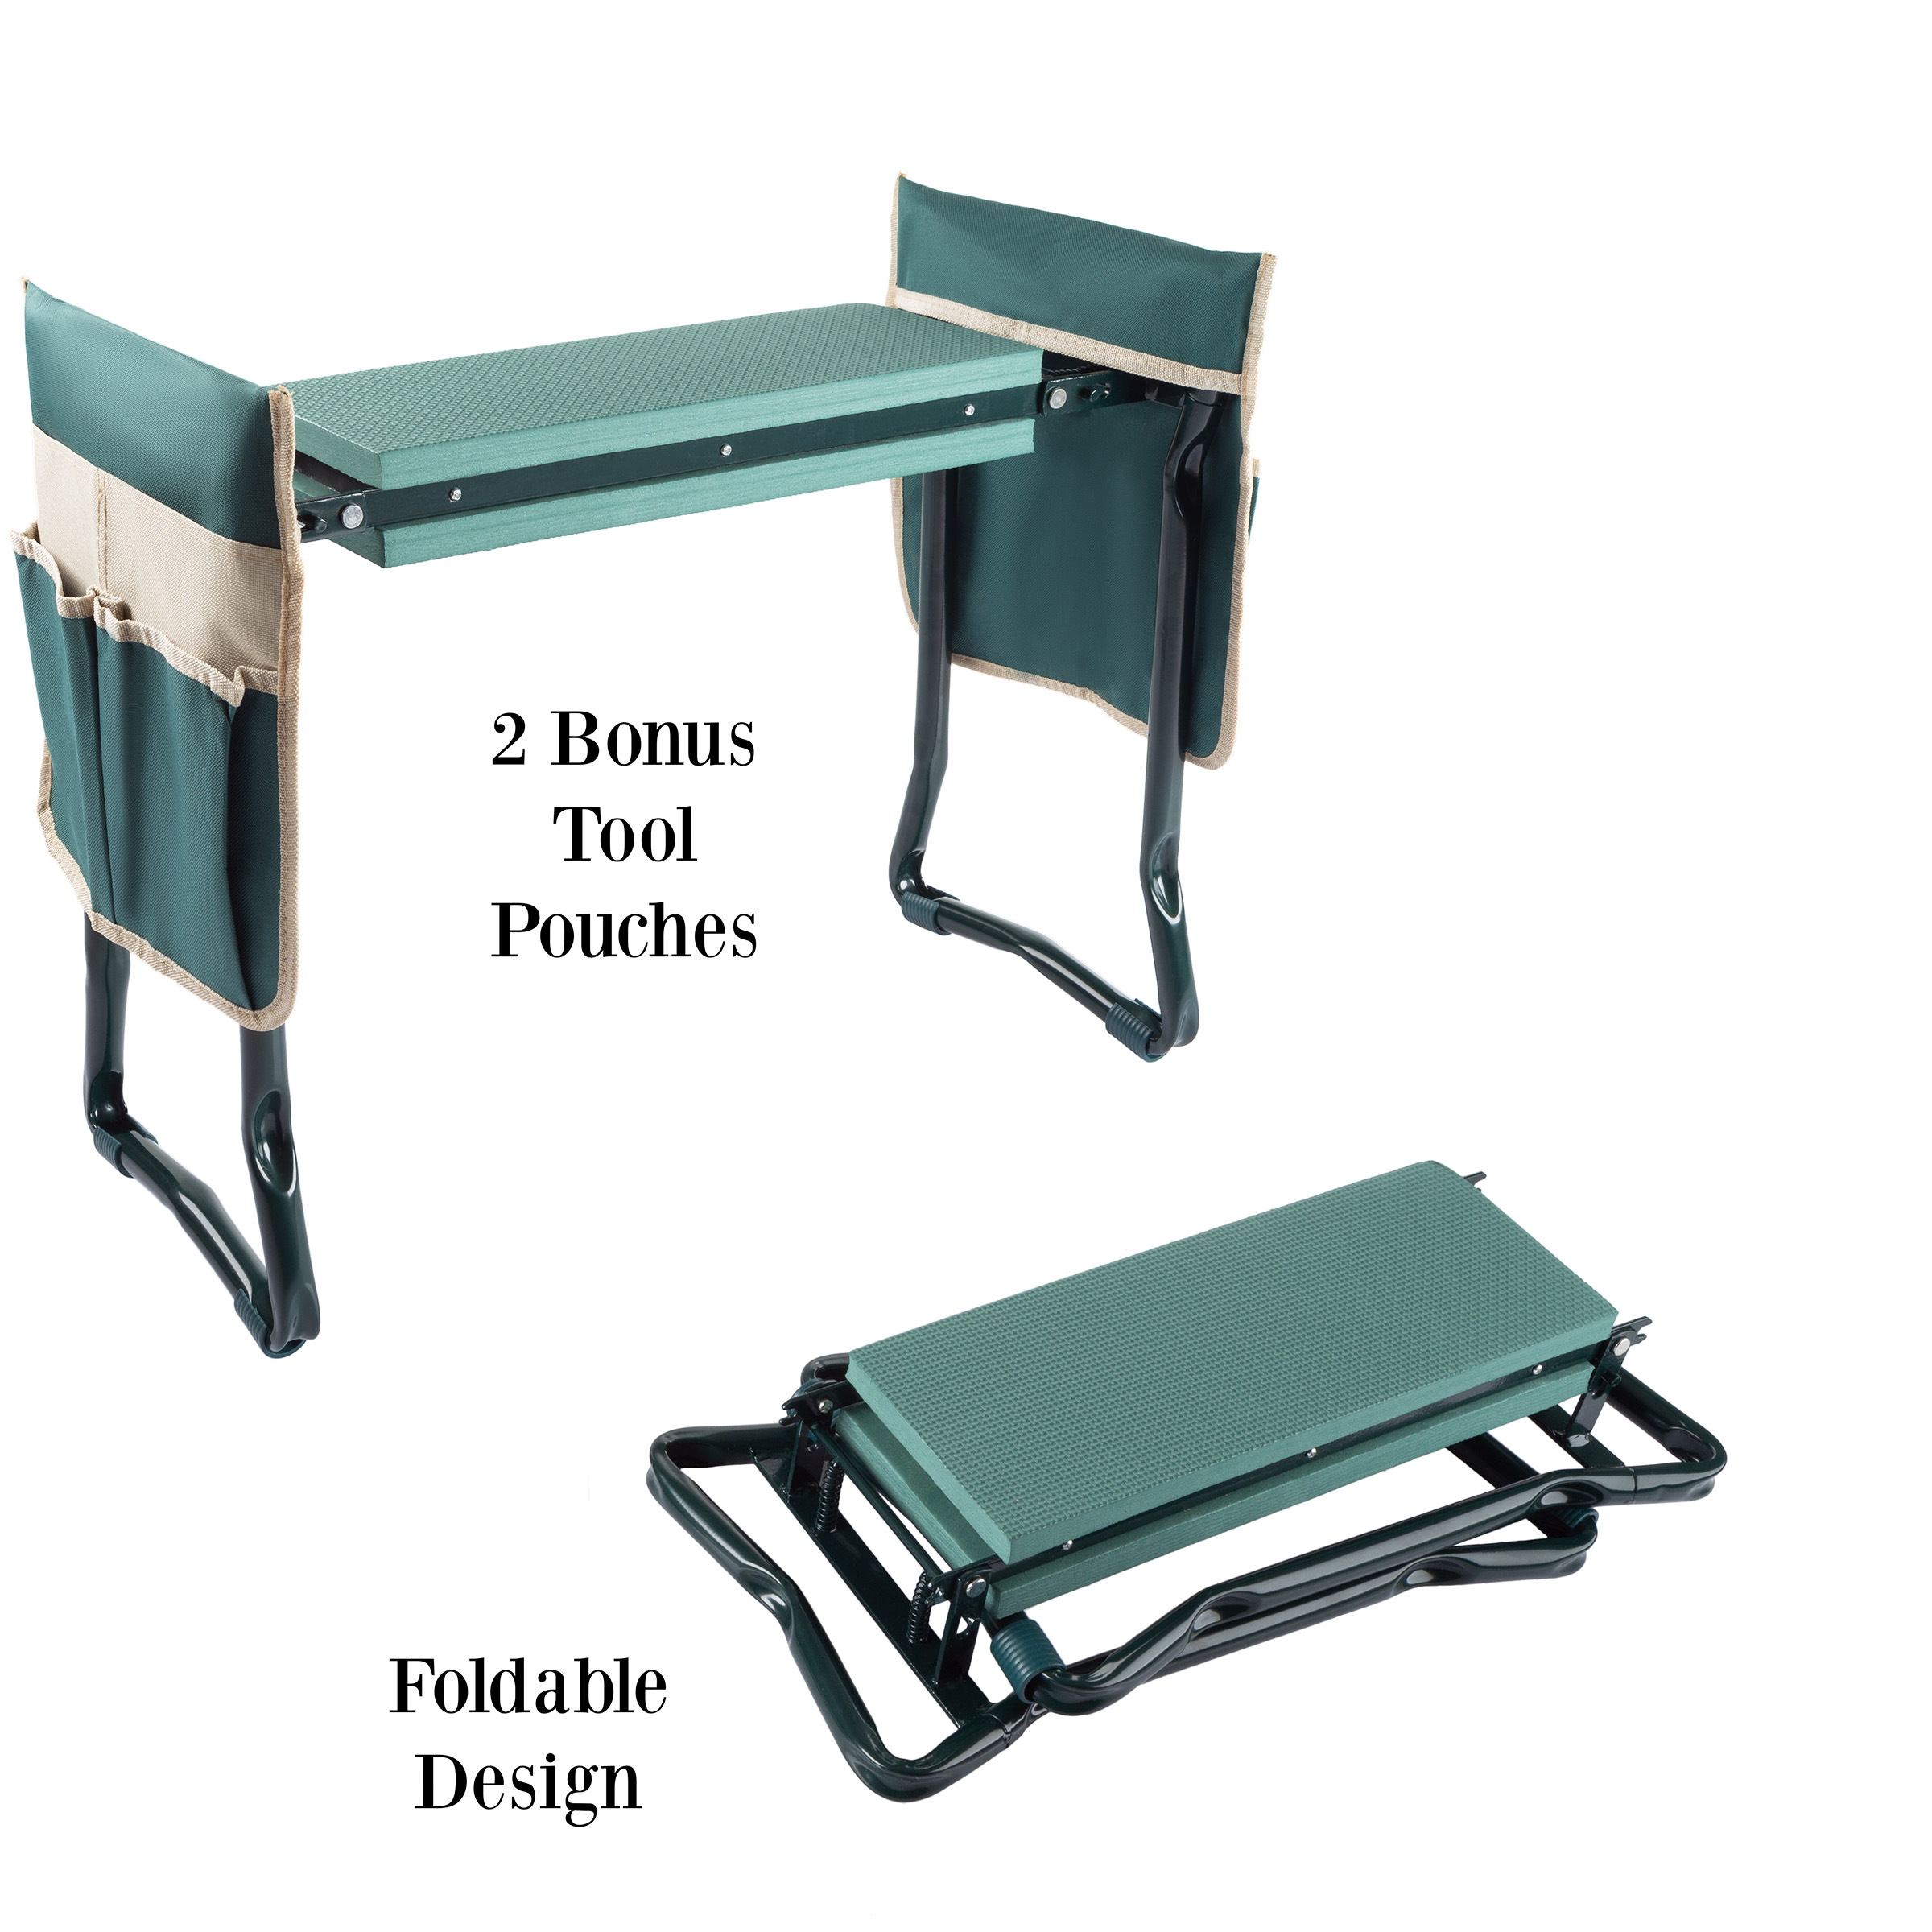 Pure Garden Kneeler Bench - Foldable Stool with 2 Tool Pouches (Green) - image 3 of 7